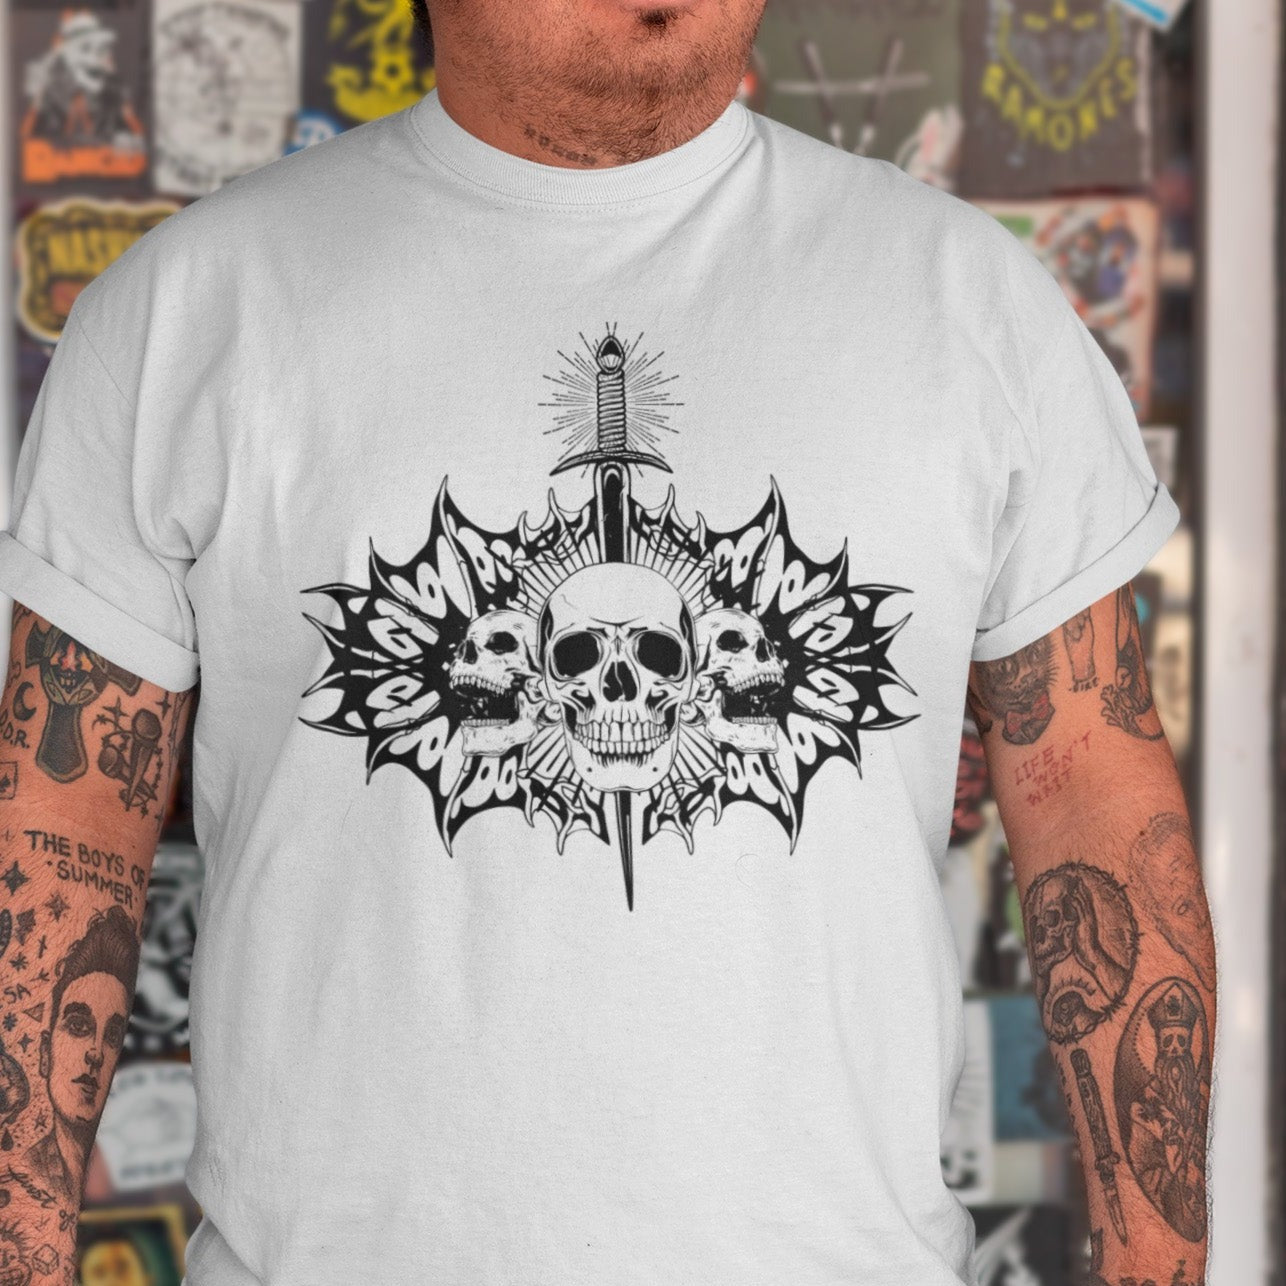 blade-and-bone-punk-rock-asphalt-t-shirt-mockup-of-a-man-with-tattooed-arms-posing-by-a-glass-door